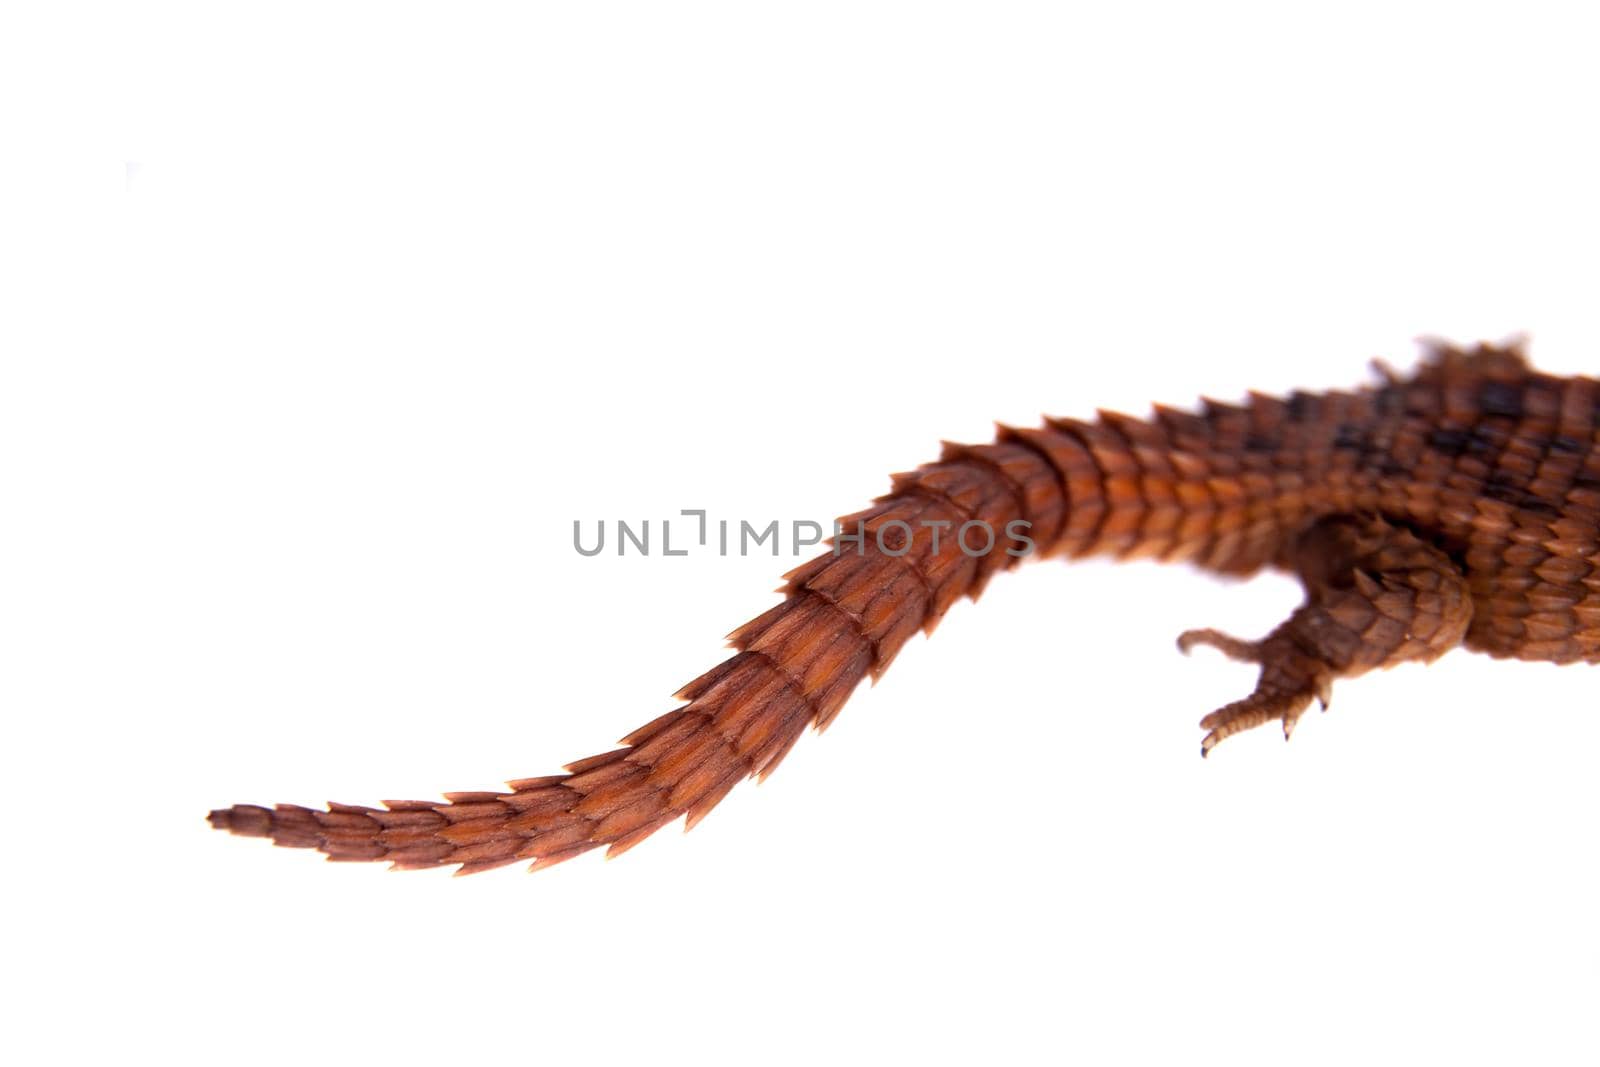 Transvaal Girdled Lizard on white background. by RosaJay